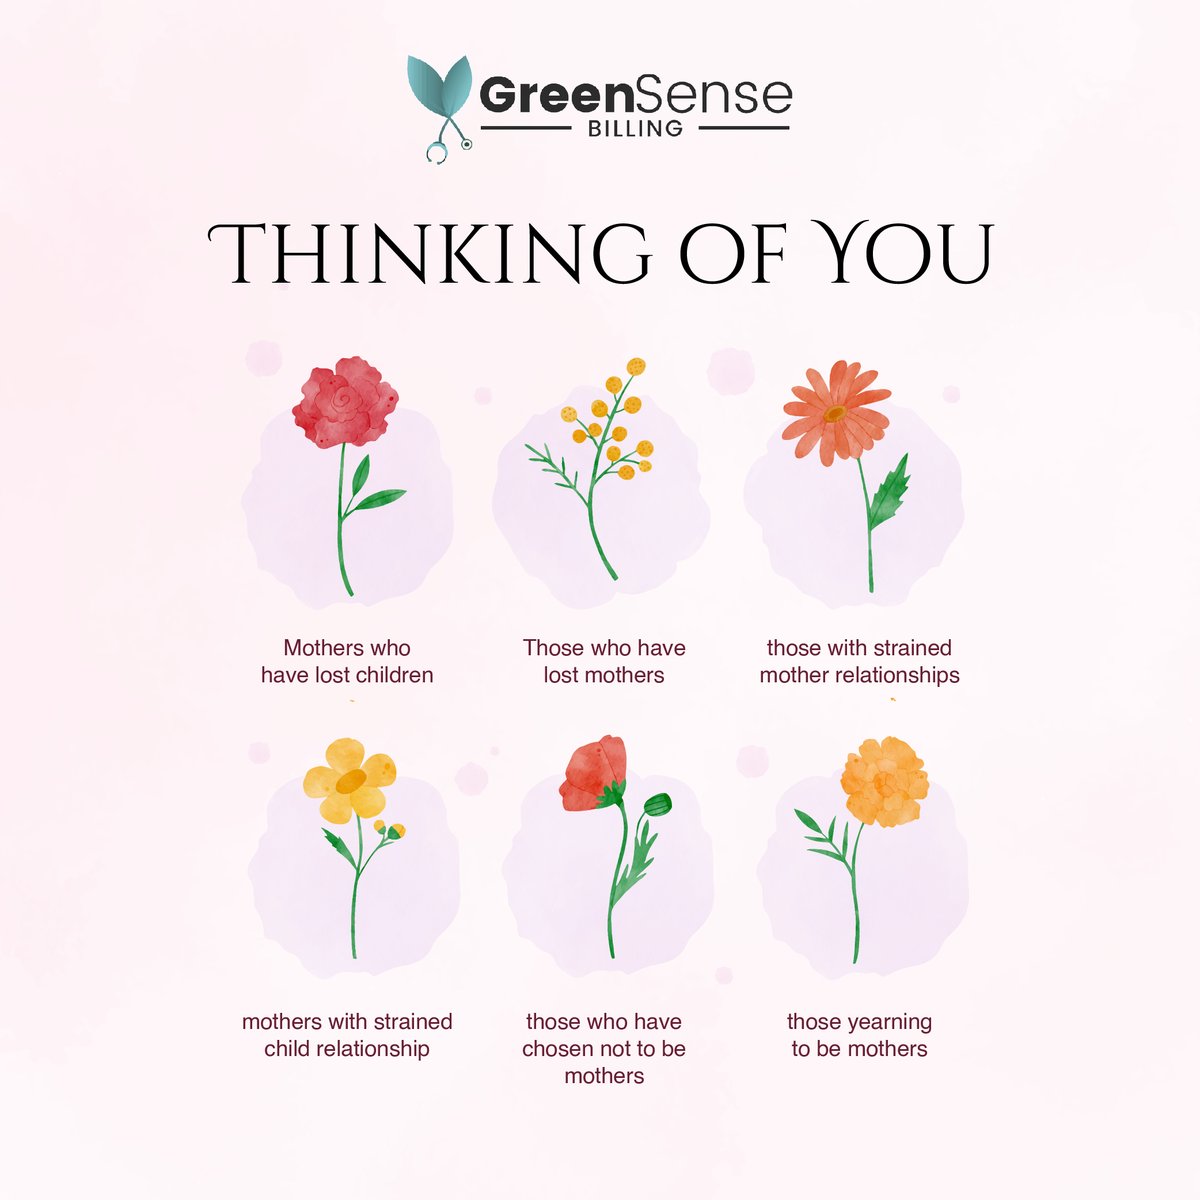 Wishing you a day as lovely as you are! Happy Mother's Day from the team at GreenSense Billing! ❤️
.
contact@greensensebilling.com | (888) 483-1438
.
#HealthcareBilling #mothersday #happymotherday #gifts  #medicalbillingsolutions #denialmanagement #greensensebilling